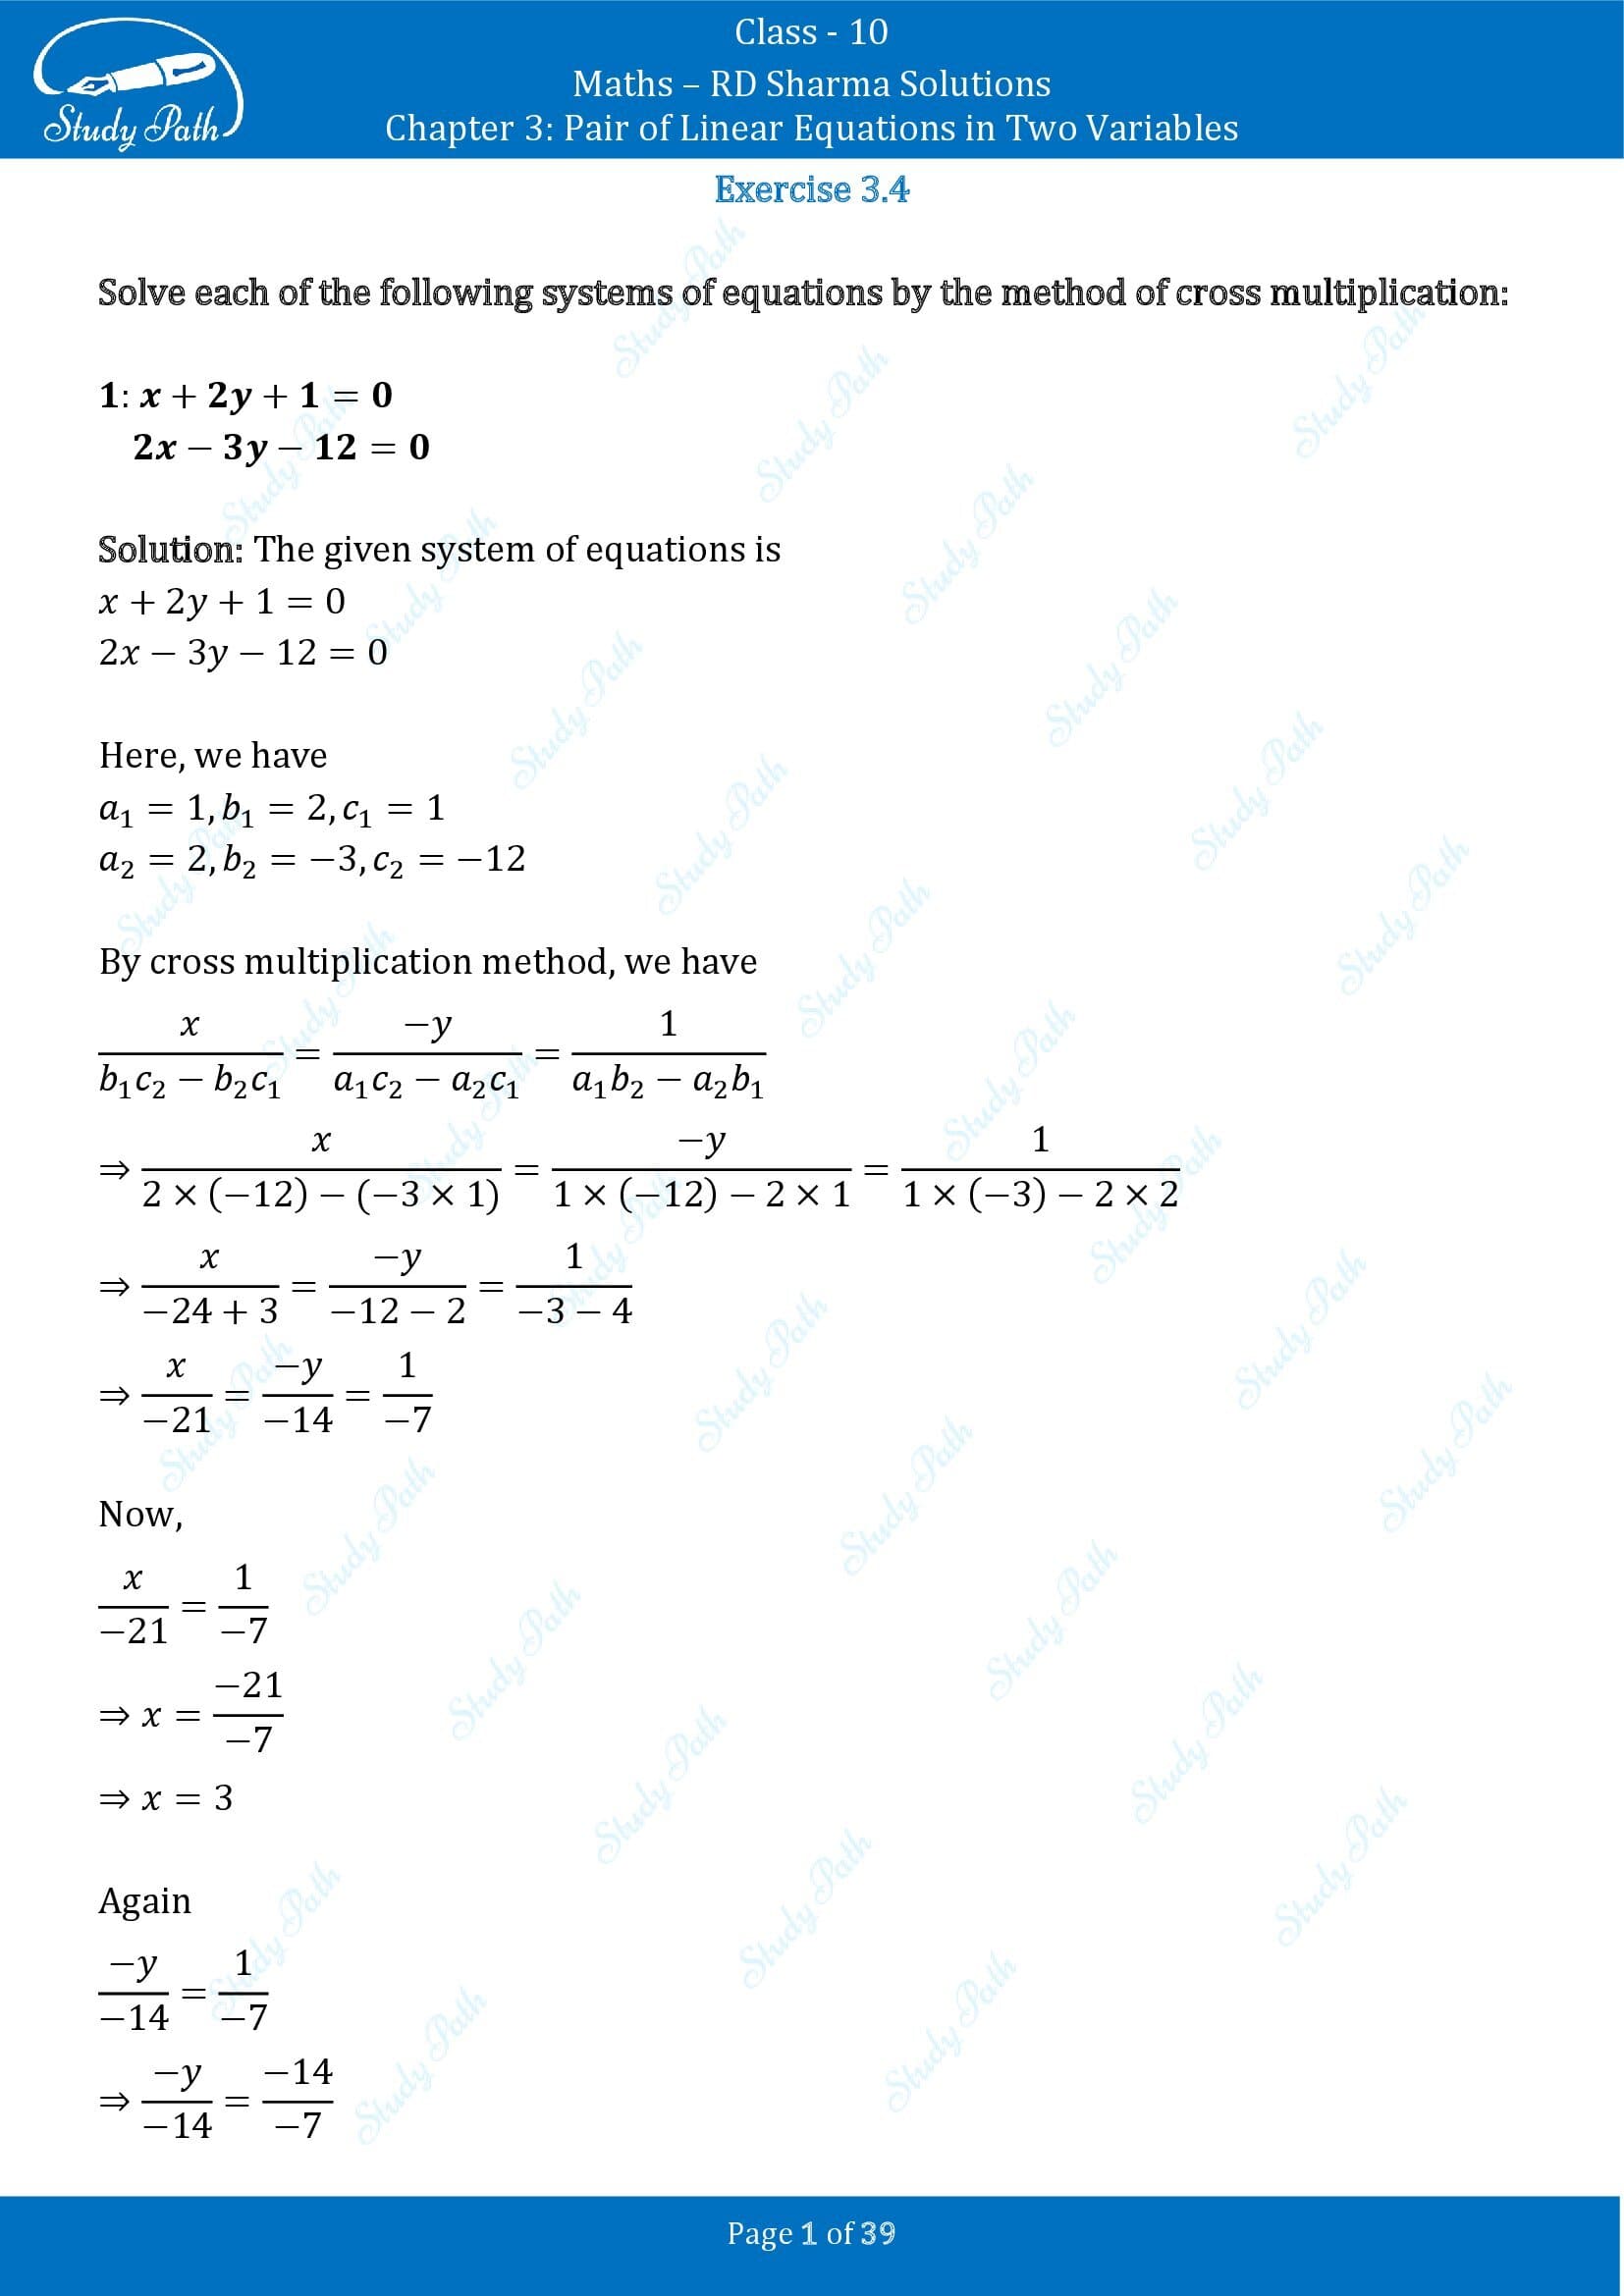 RD Sharma Solutions Class 10 Chapter 3 Pair of Linear Equations in Two Variables Exercise 3.4 00001